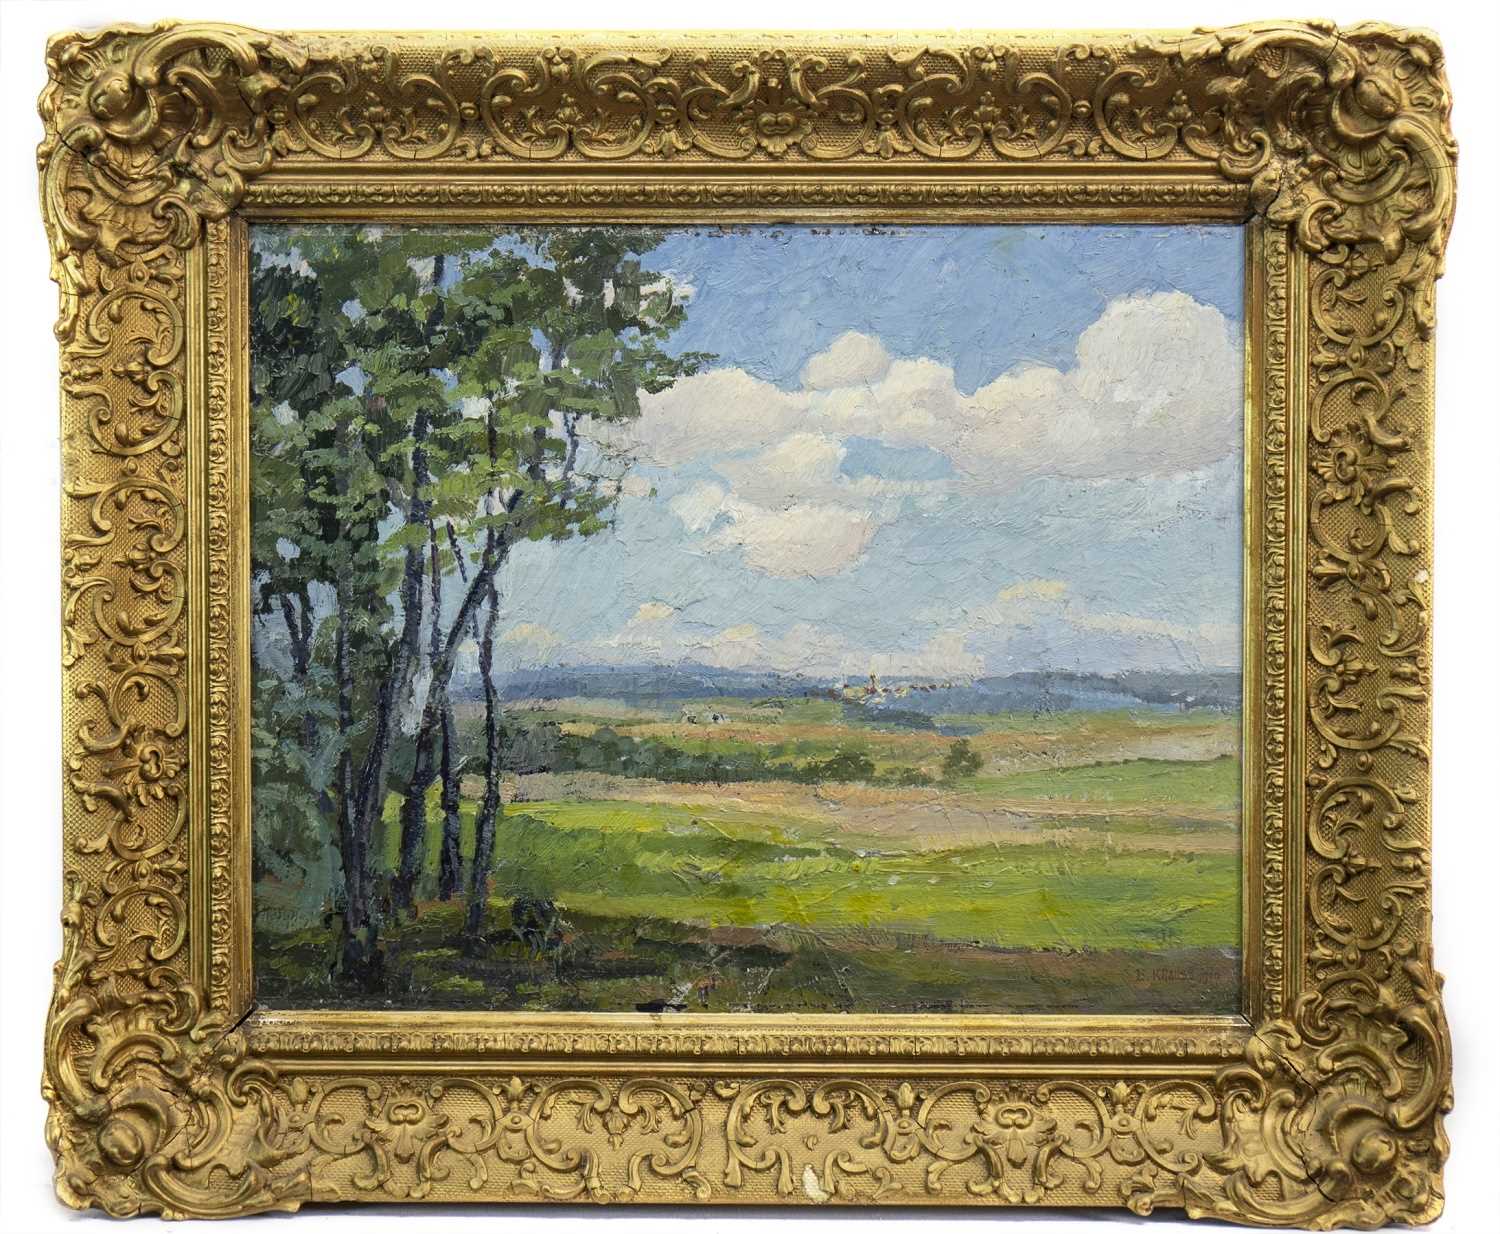 Lot 426 - LANDSCAPE WITH TREES, AN OIL BY EMILE AXEL KRAUSSE